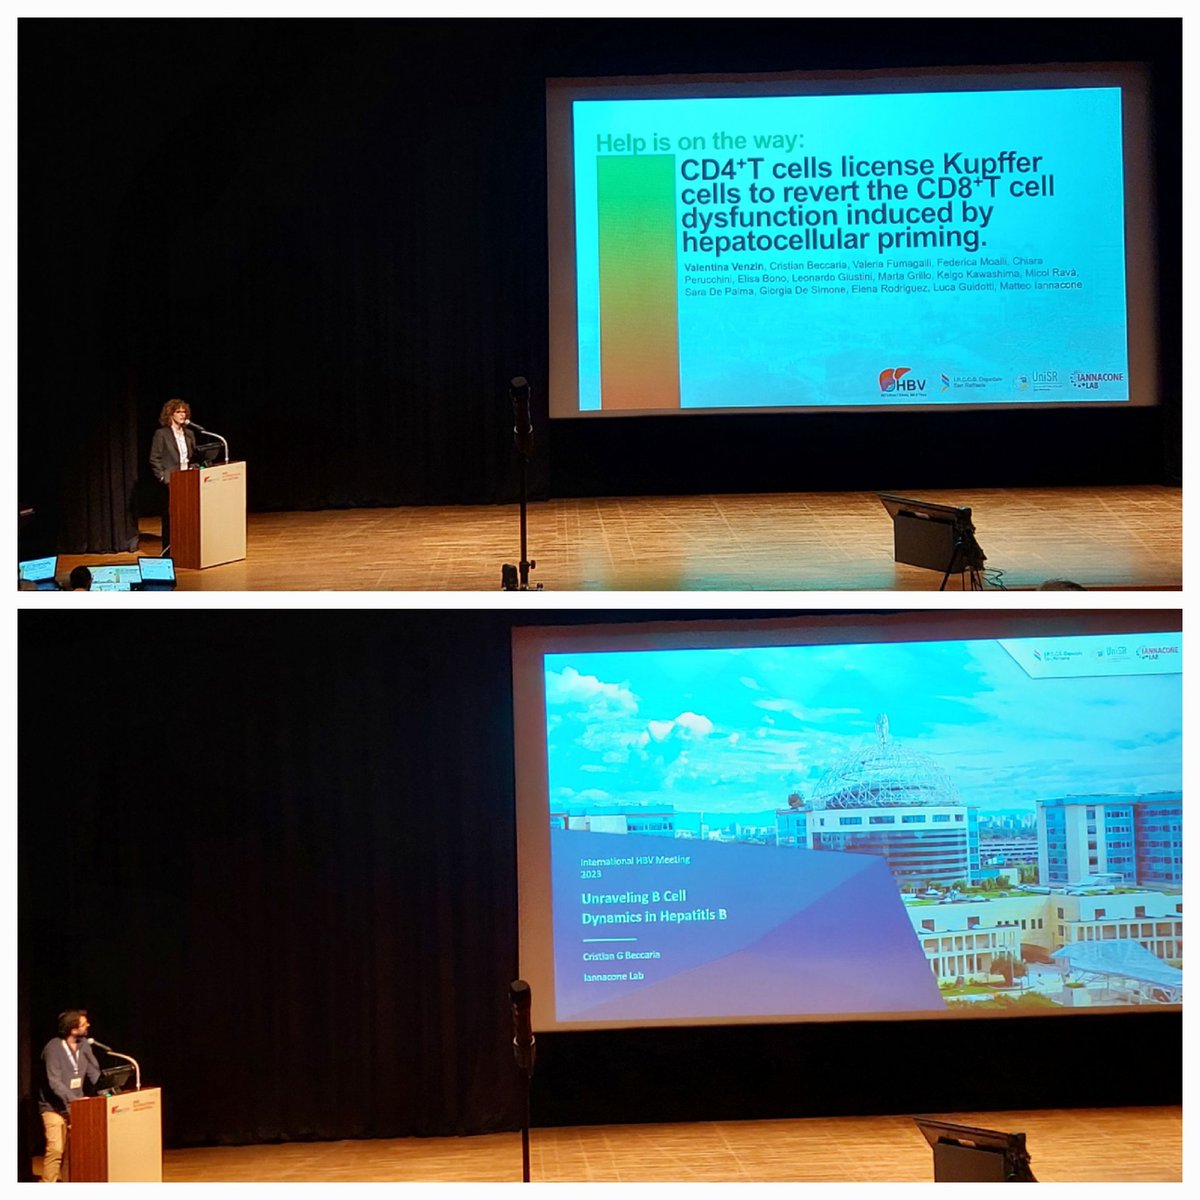 Amazing science at #HBVmeeting in #Kobe! Great presentation by @frarro1 @VenzinValentina @CristianBecc about CD8 T cells, CD4 T cells and B cells in mouse models of HBV. Dissection of the adaptive immune response in the liver at 360 degrees. Glad to be their colleague.